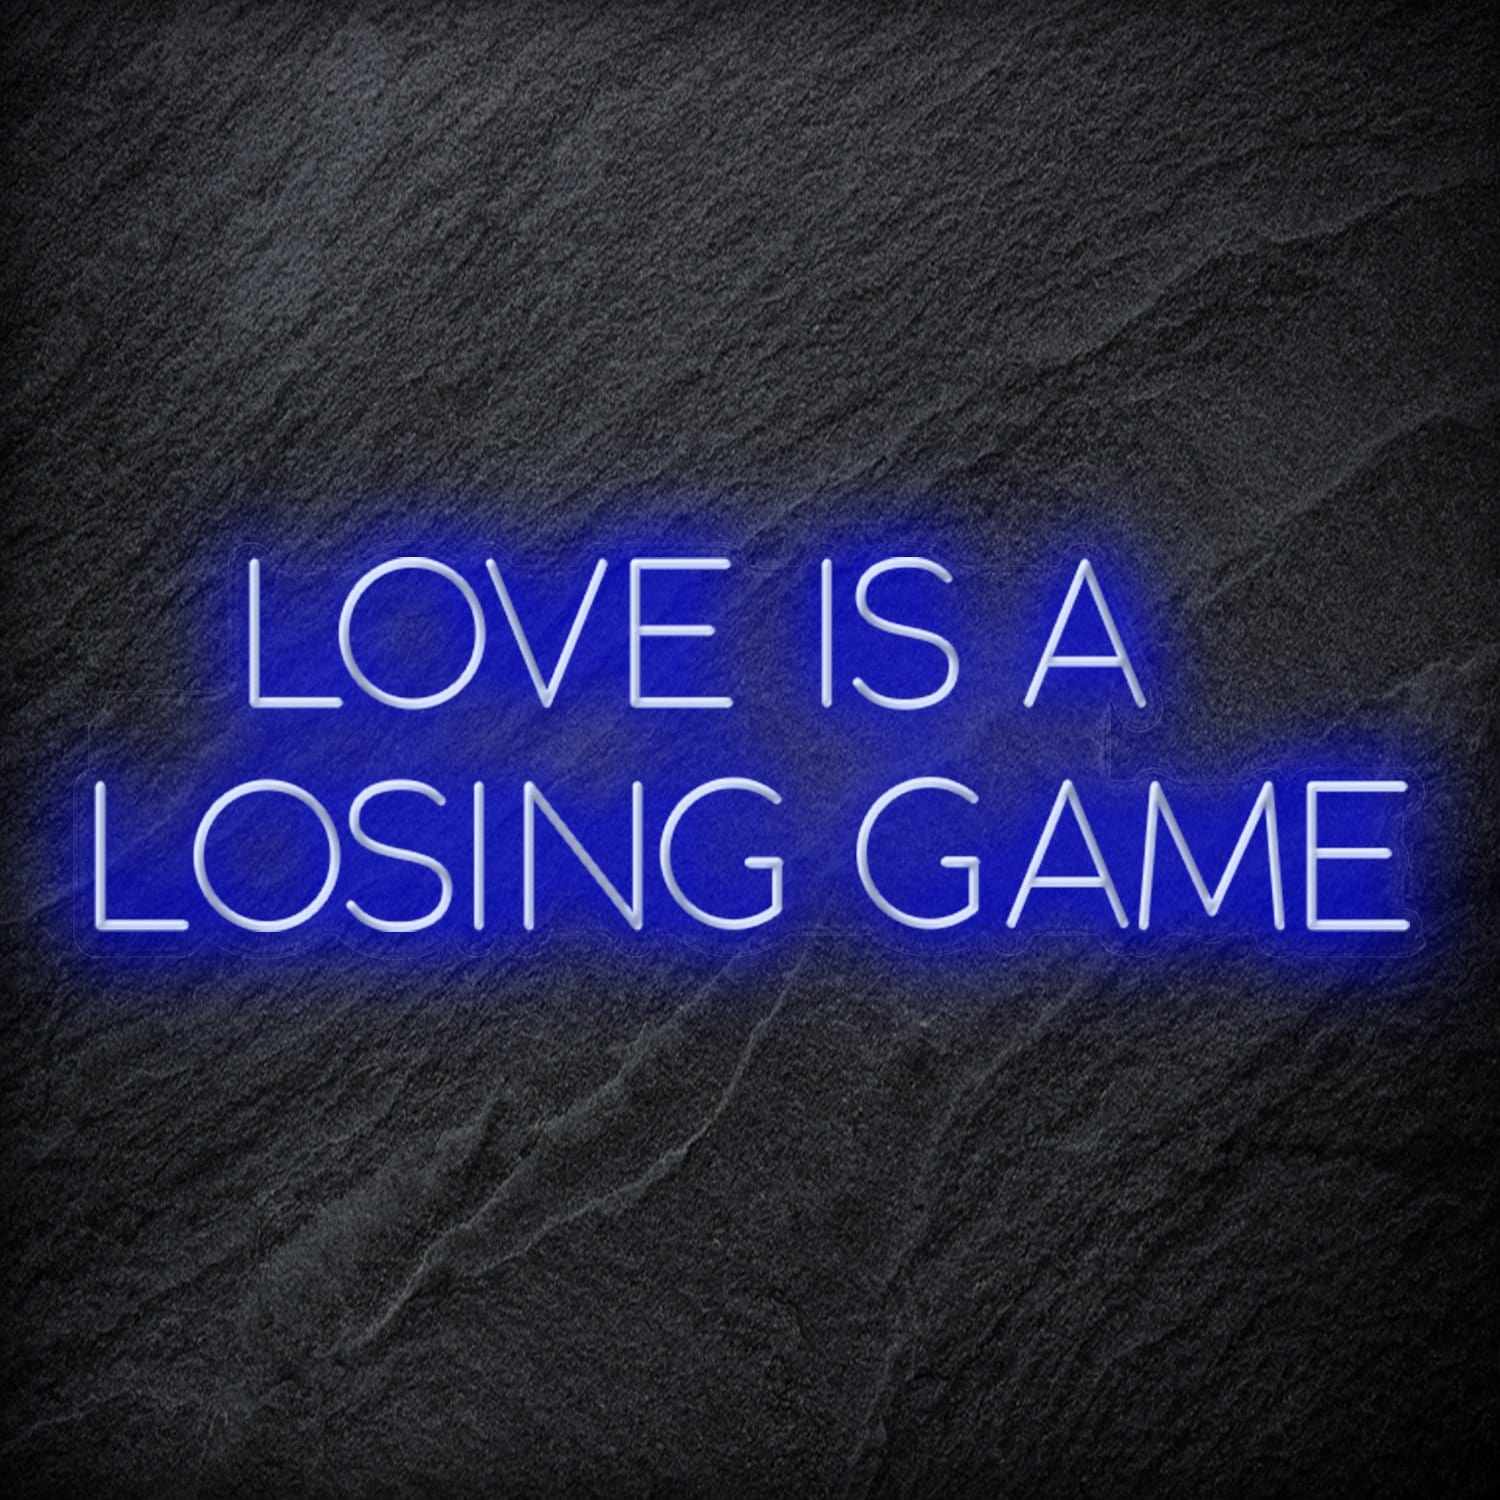 "Love Is A Losing Game" LED Neon Schriftzug Sign - NEONEVERGLOW